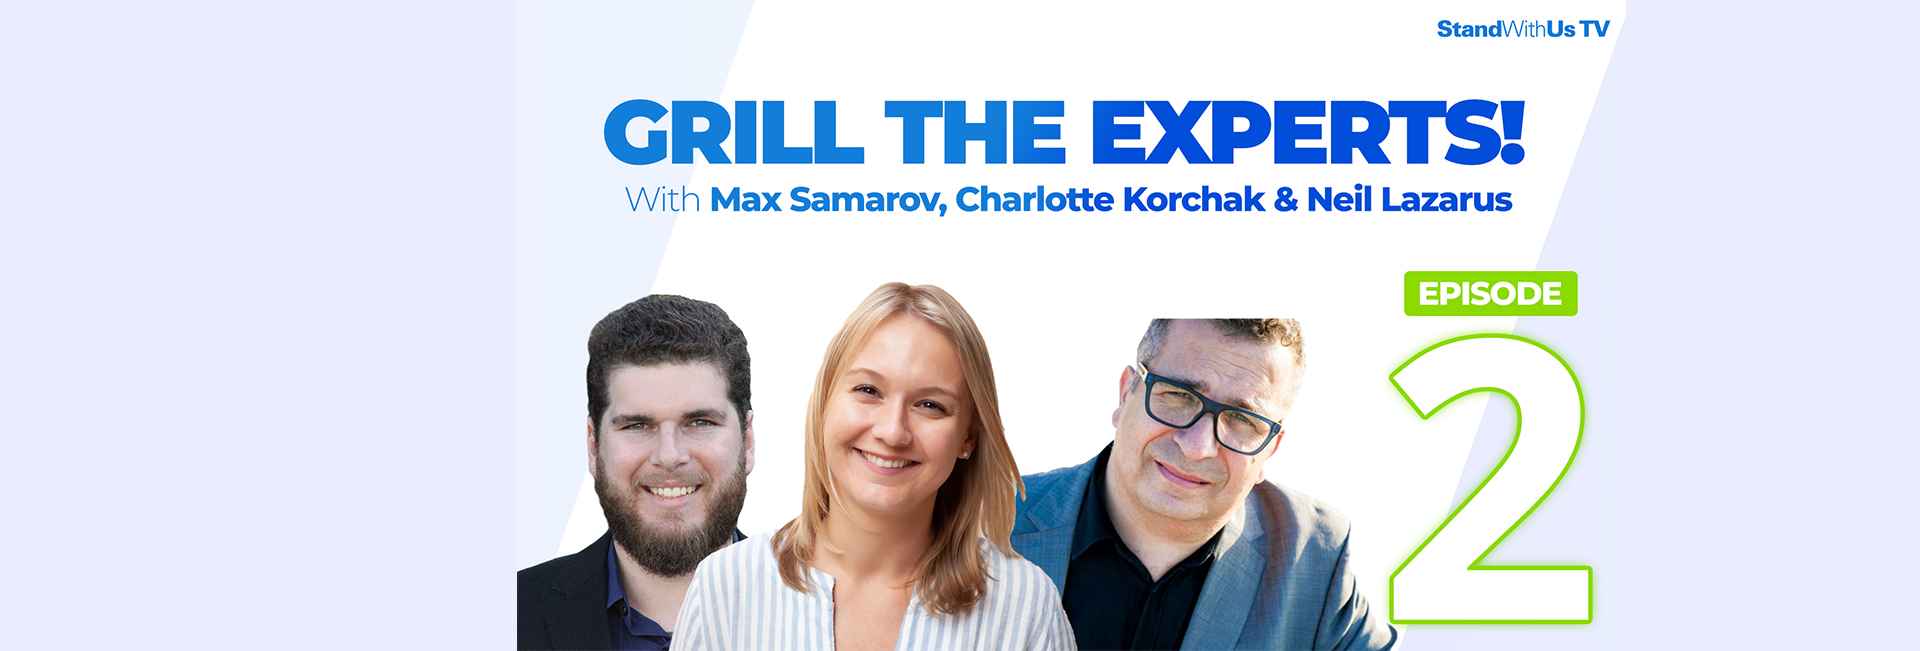 Grill The Experts | Episode 2